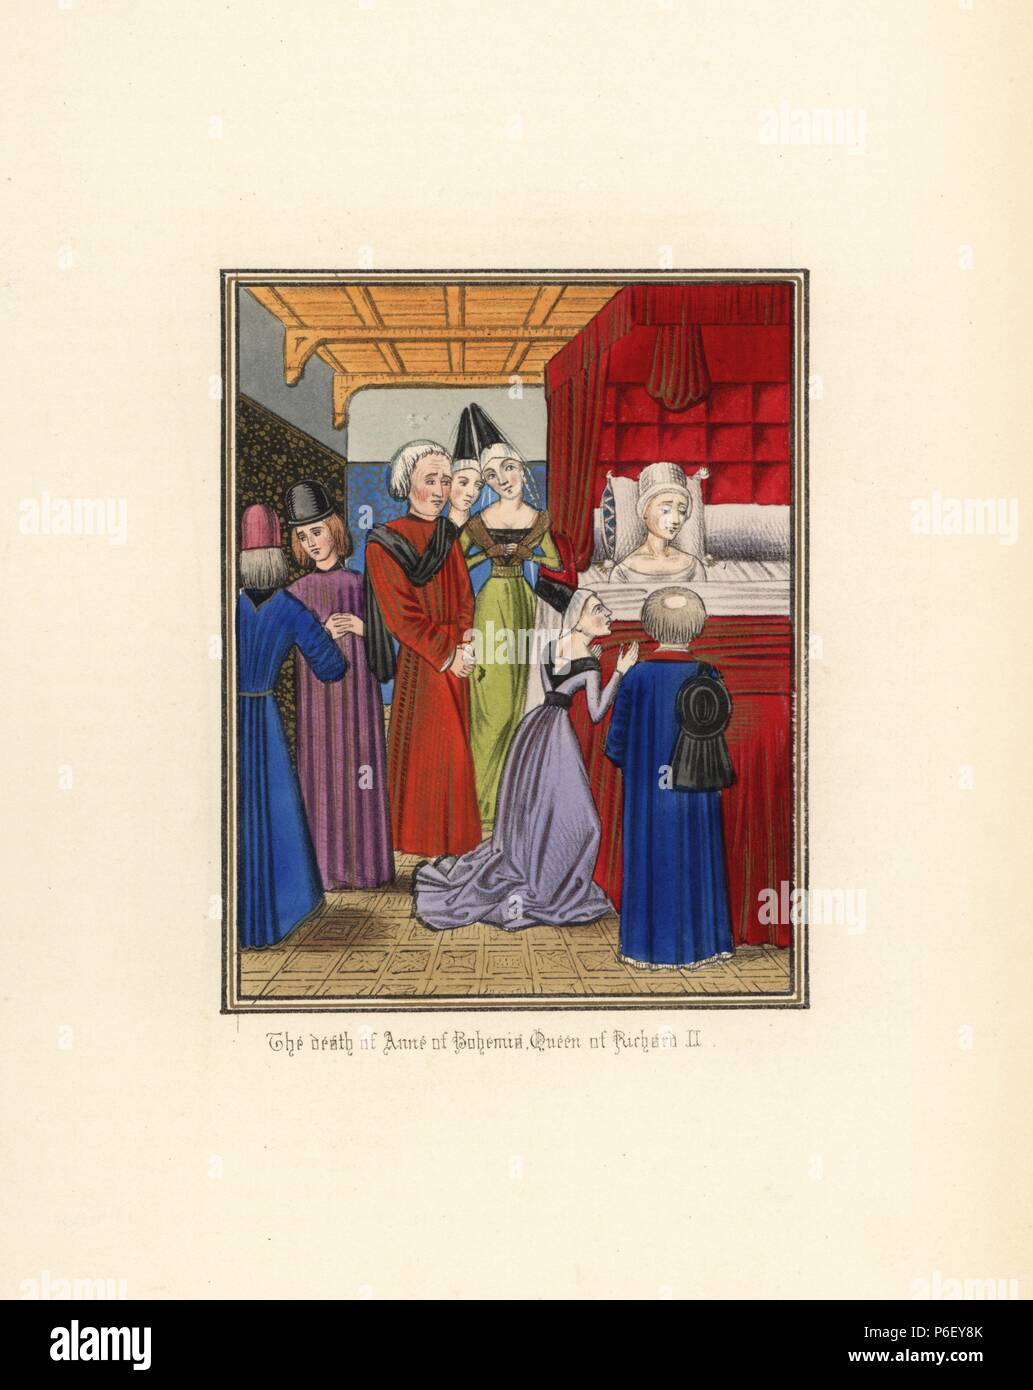 The death of Anne of Bohemia, queen of Richard II, daughter of emperor Charles IV, aged 28, 1394. She lies on a canopied bed surrounded by ladies in waiting, courtiers and clergy. Handcoloured lithograph after an illuminated manuscript from Sir John Froissart's 'Chronicles of England, France, Spain and the Adjoining Countries, from the Latter Part of the Reign of Edward II to the Coronation of Henry IV,' George Routledge, London, 1868. Stock Photo